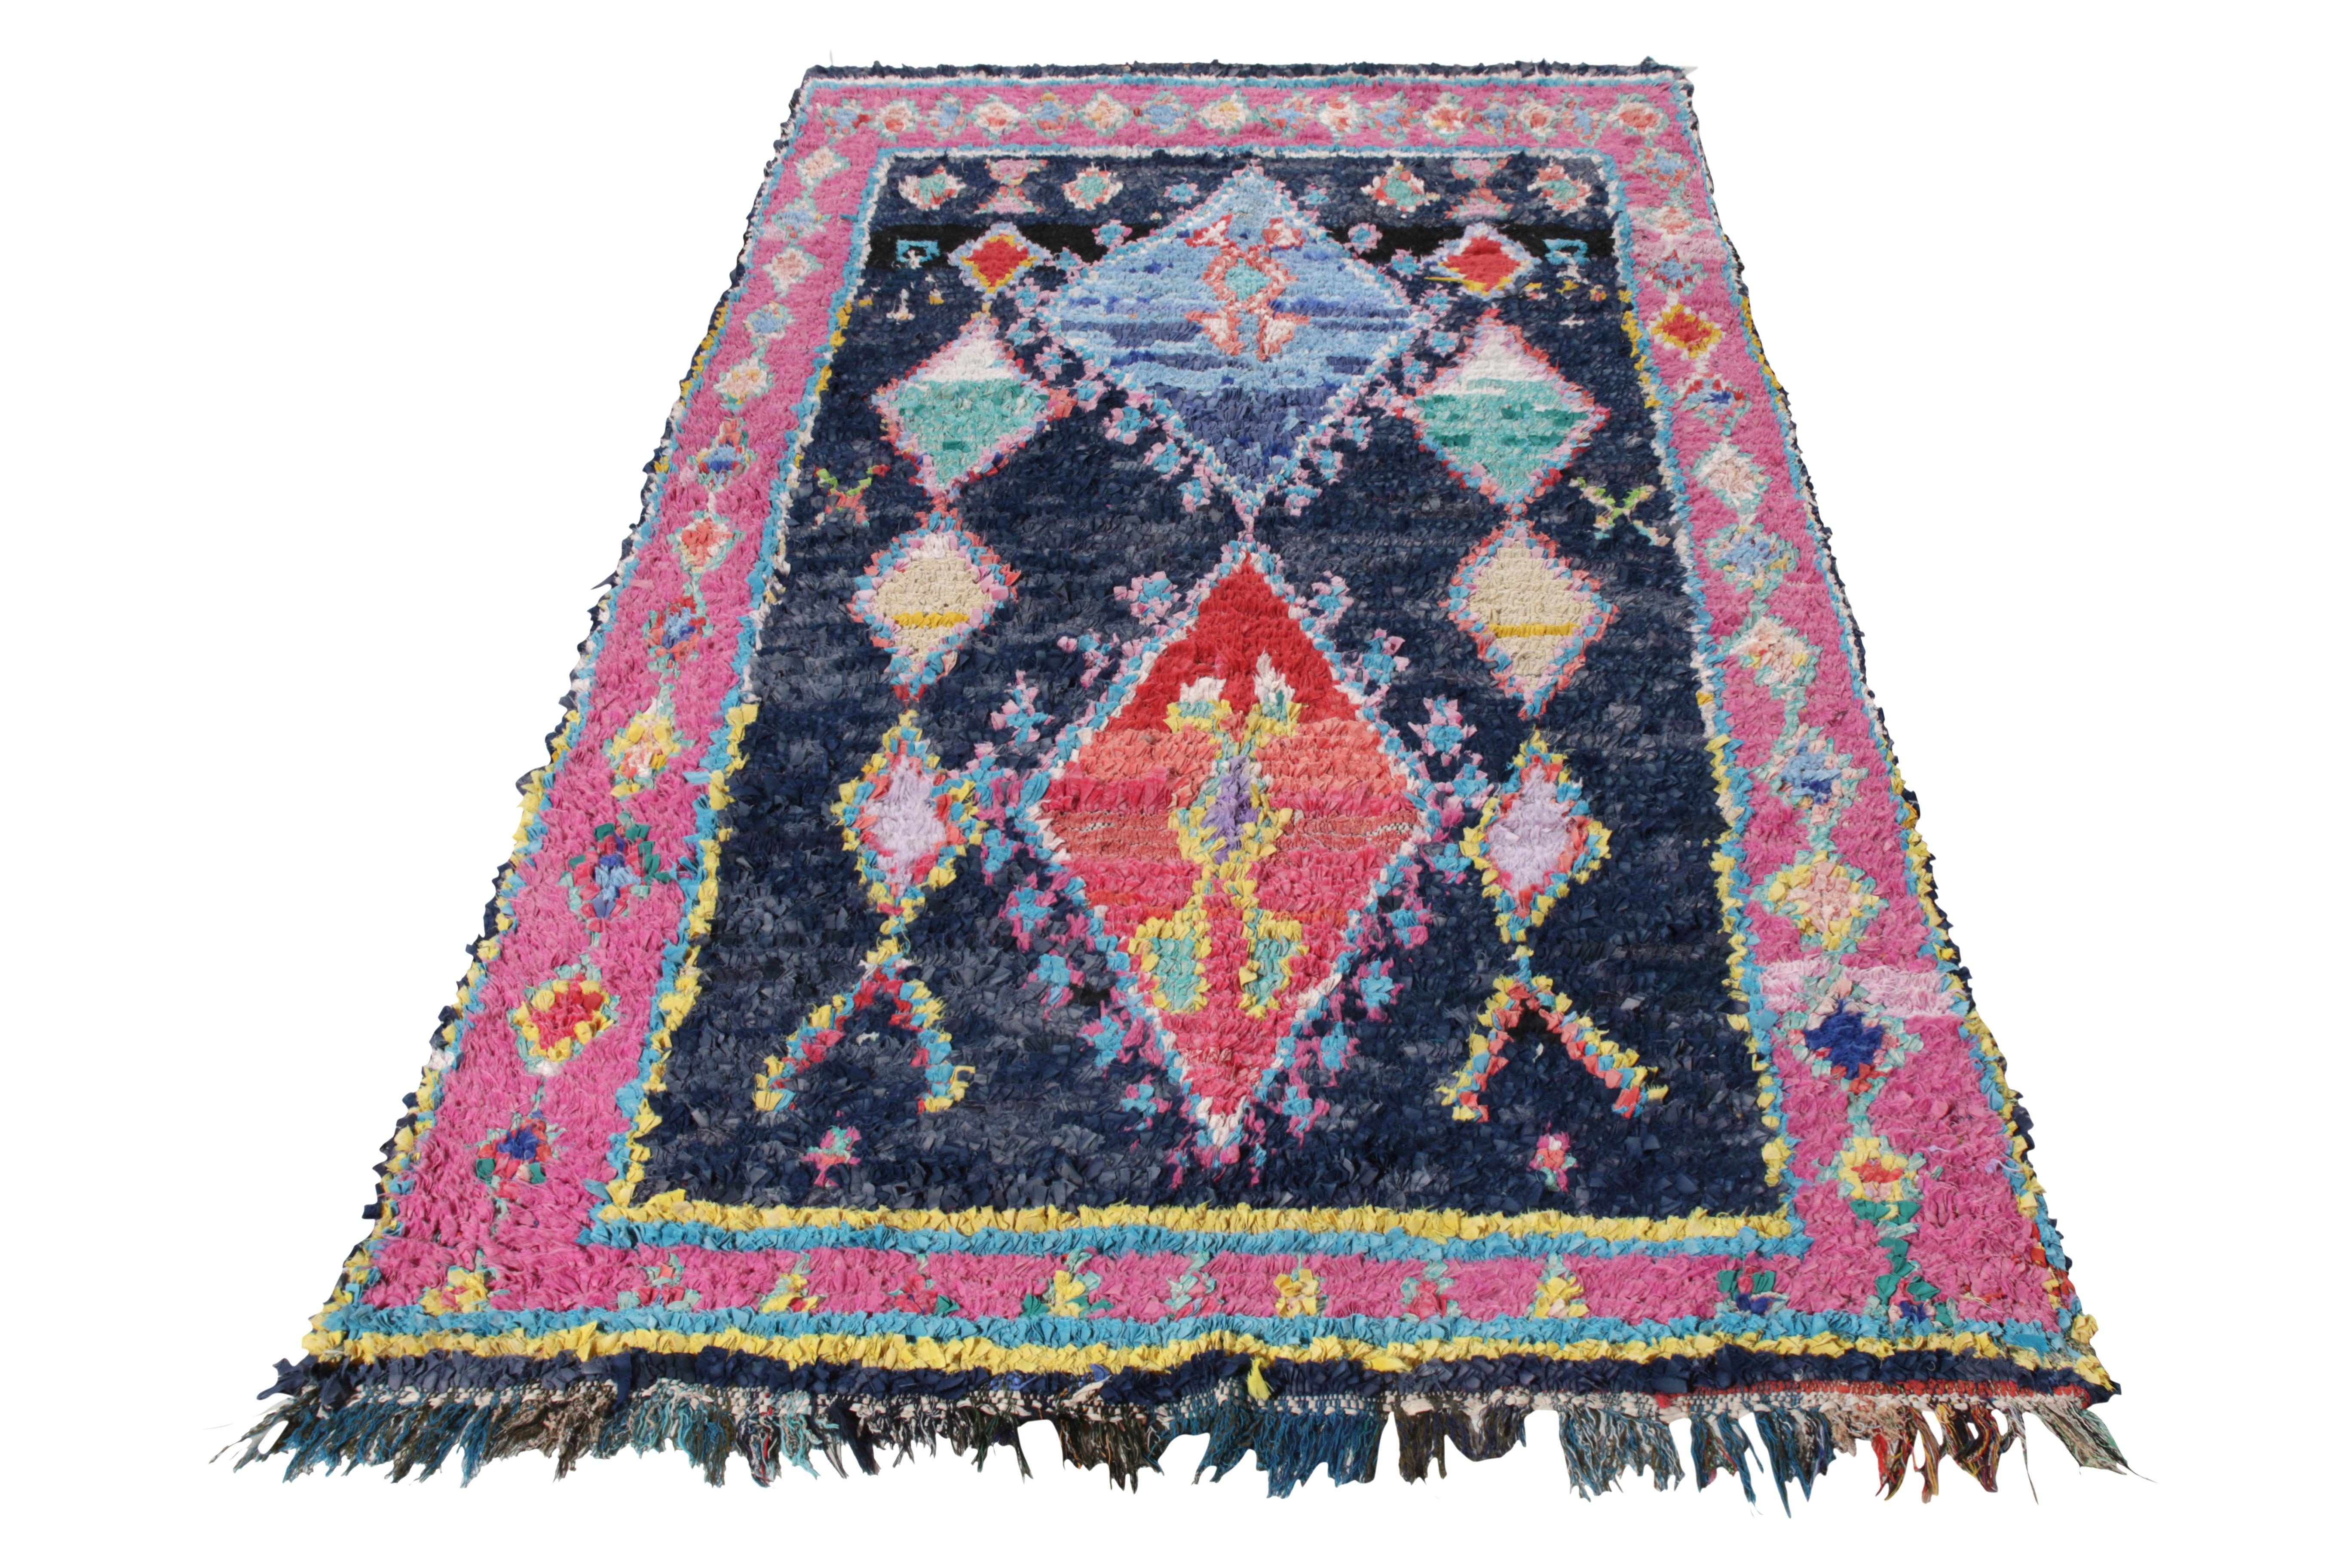 Originating from Morocco circa 1950-1960, a vintage Berber Kilim from Rug & Kilim’s titular Moroccan rug collection. Hand-knotted in Boucherouite fabric and wool fibres, this 5x9 piece is a concoction of pile and flat weave - making it a rare piece